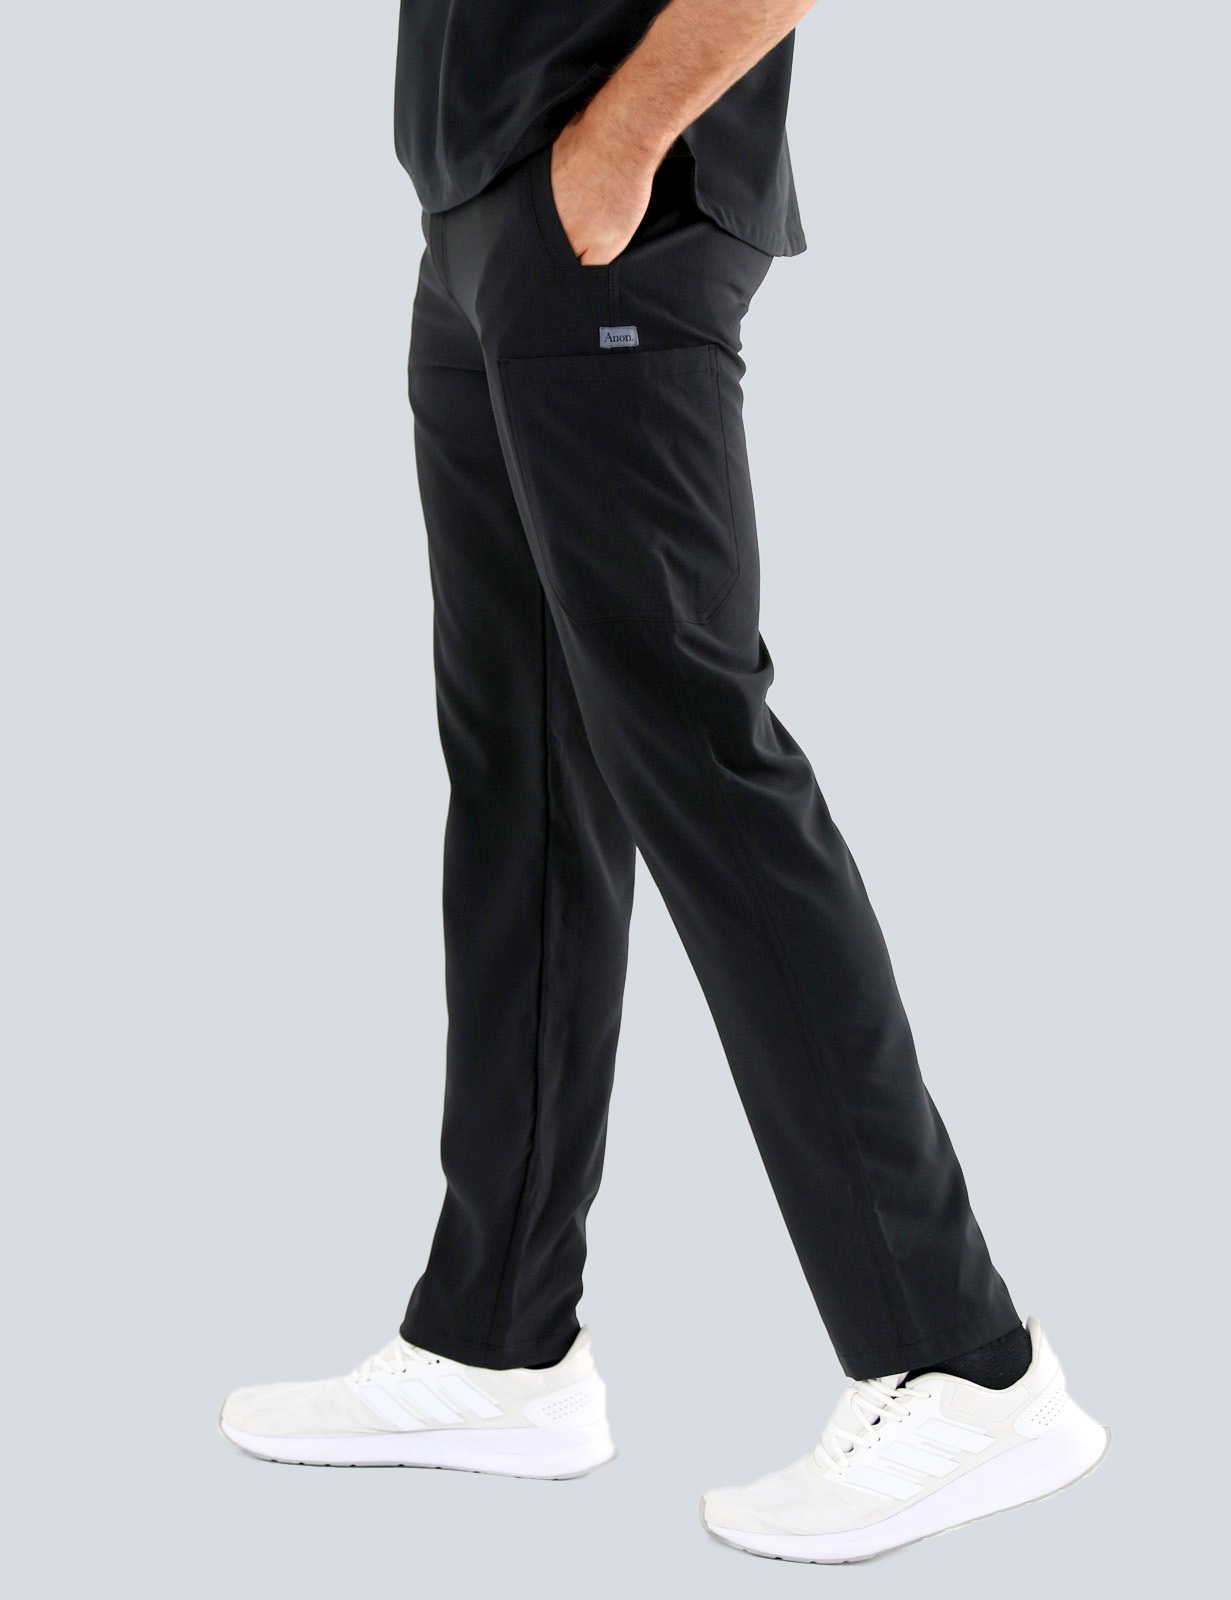 Anon Men's Scrub Pants (Stealth Collection) Poly/Spandex - 